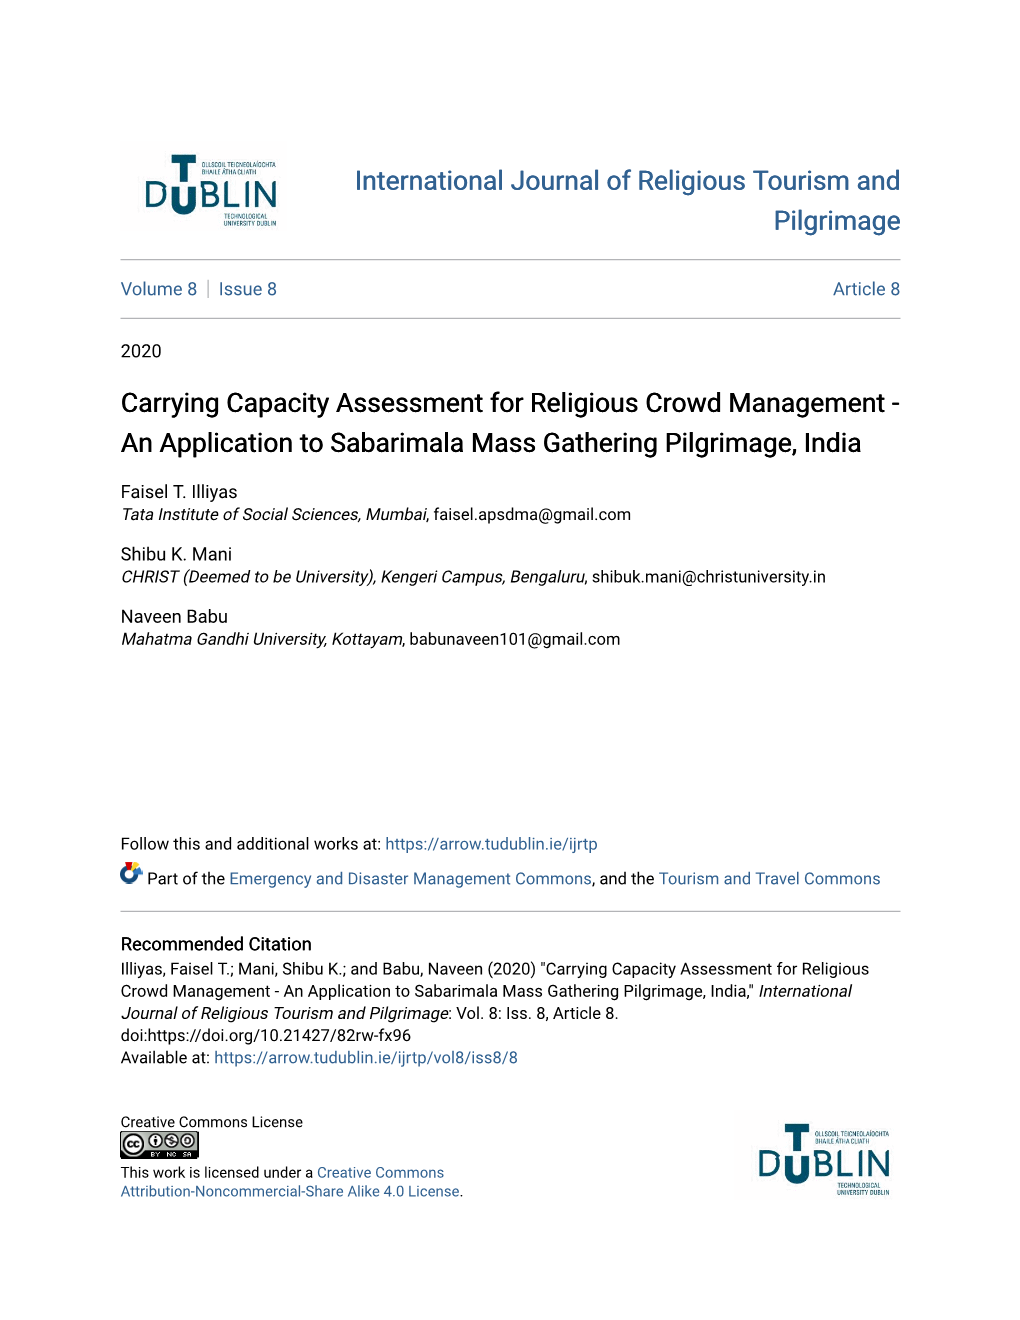 Carrying Capacity Assessment for Religious Crowd Management - an Application to Sabarimala Mass Gathering Pilgrimage, India